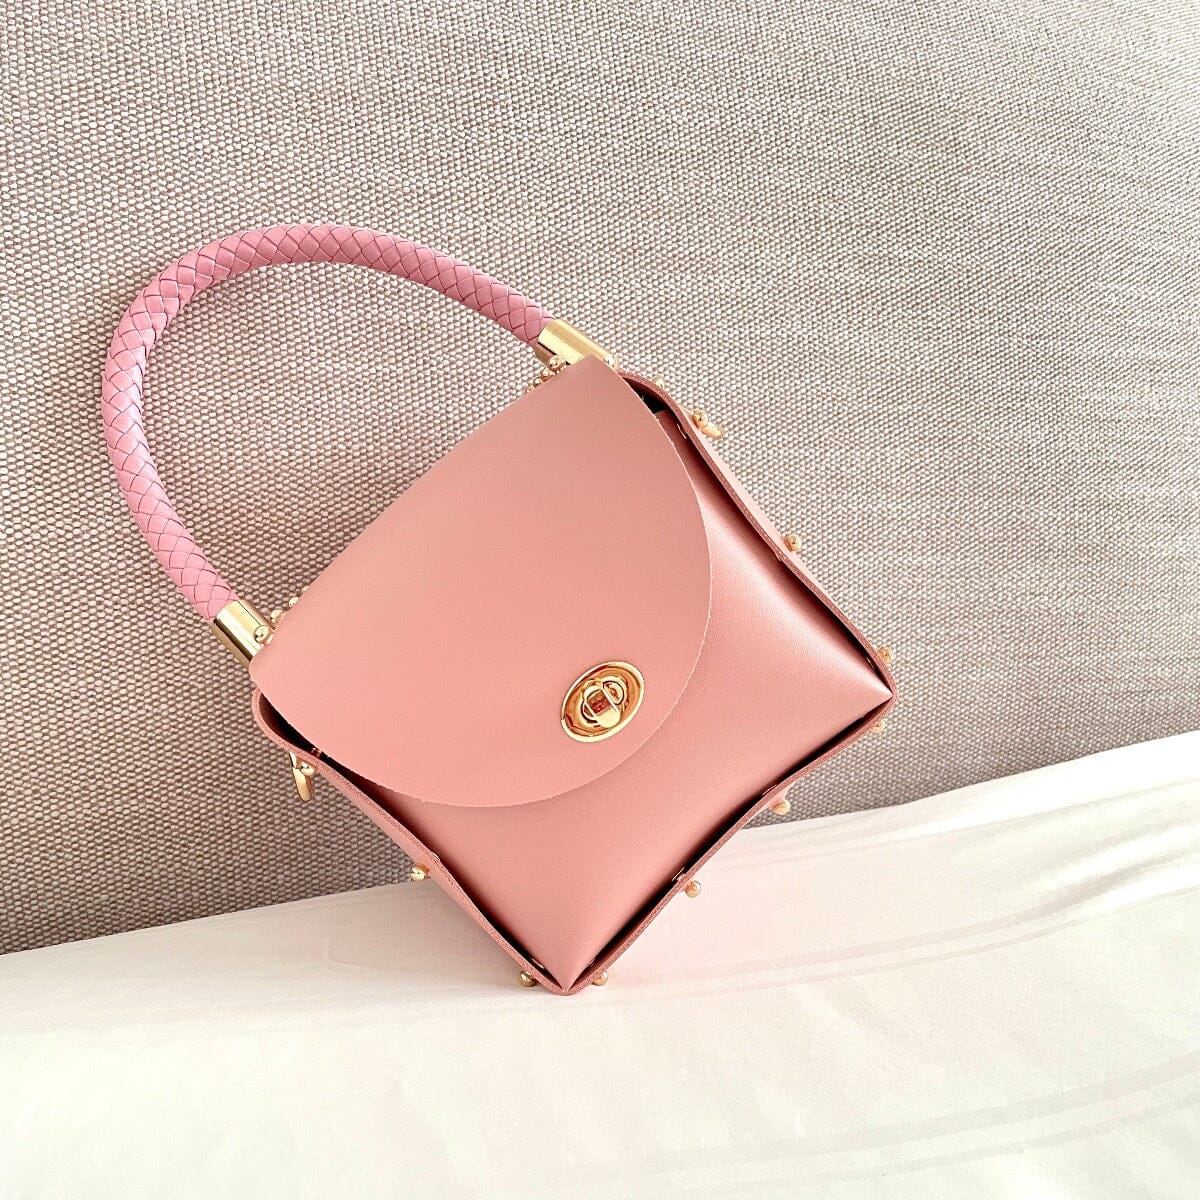 Candy box top handle bag Accessories LOVEFREYA L pink Gold 